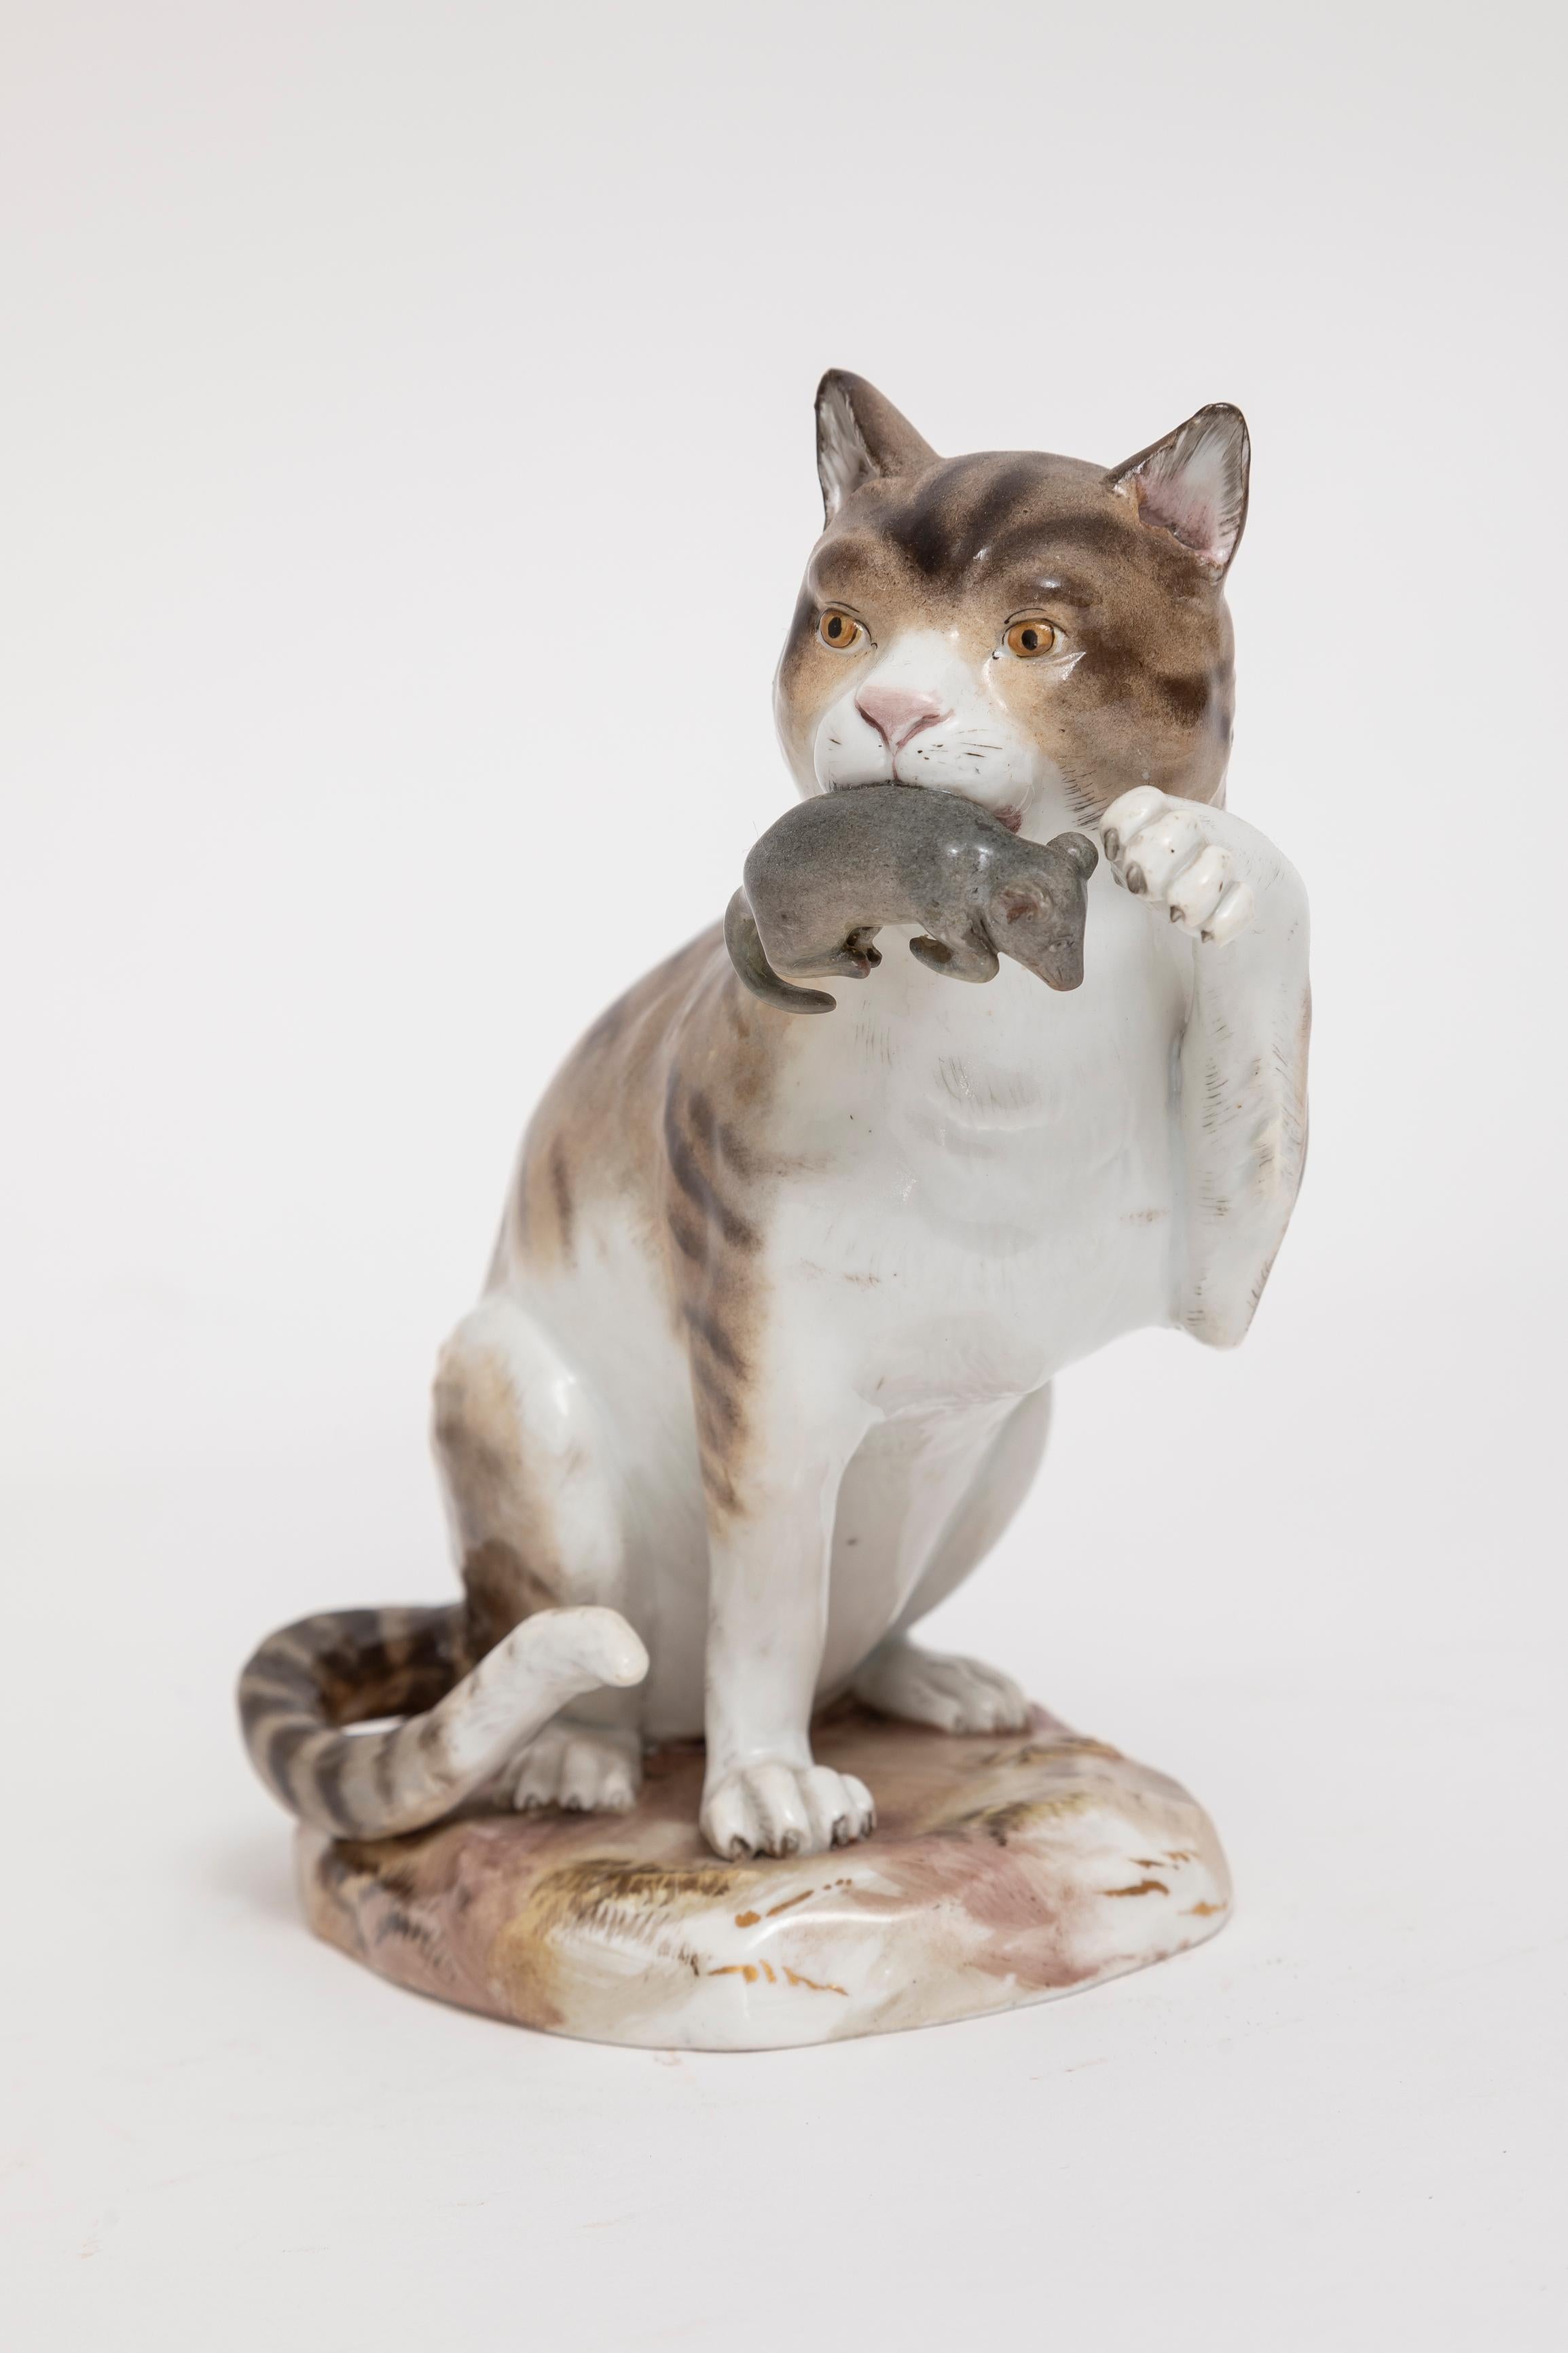 Hand-Carved A 19th C. Meissen Porcelain Figurine Depicting a Cat with Captured Mouse For Sale